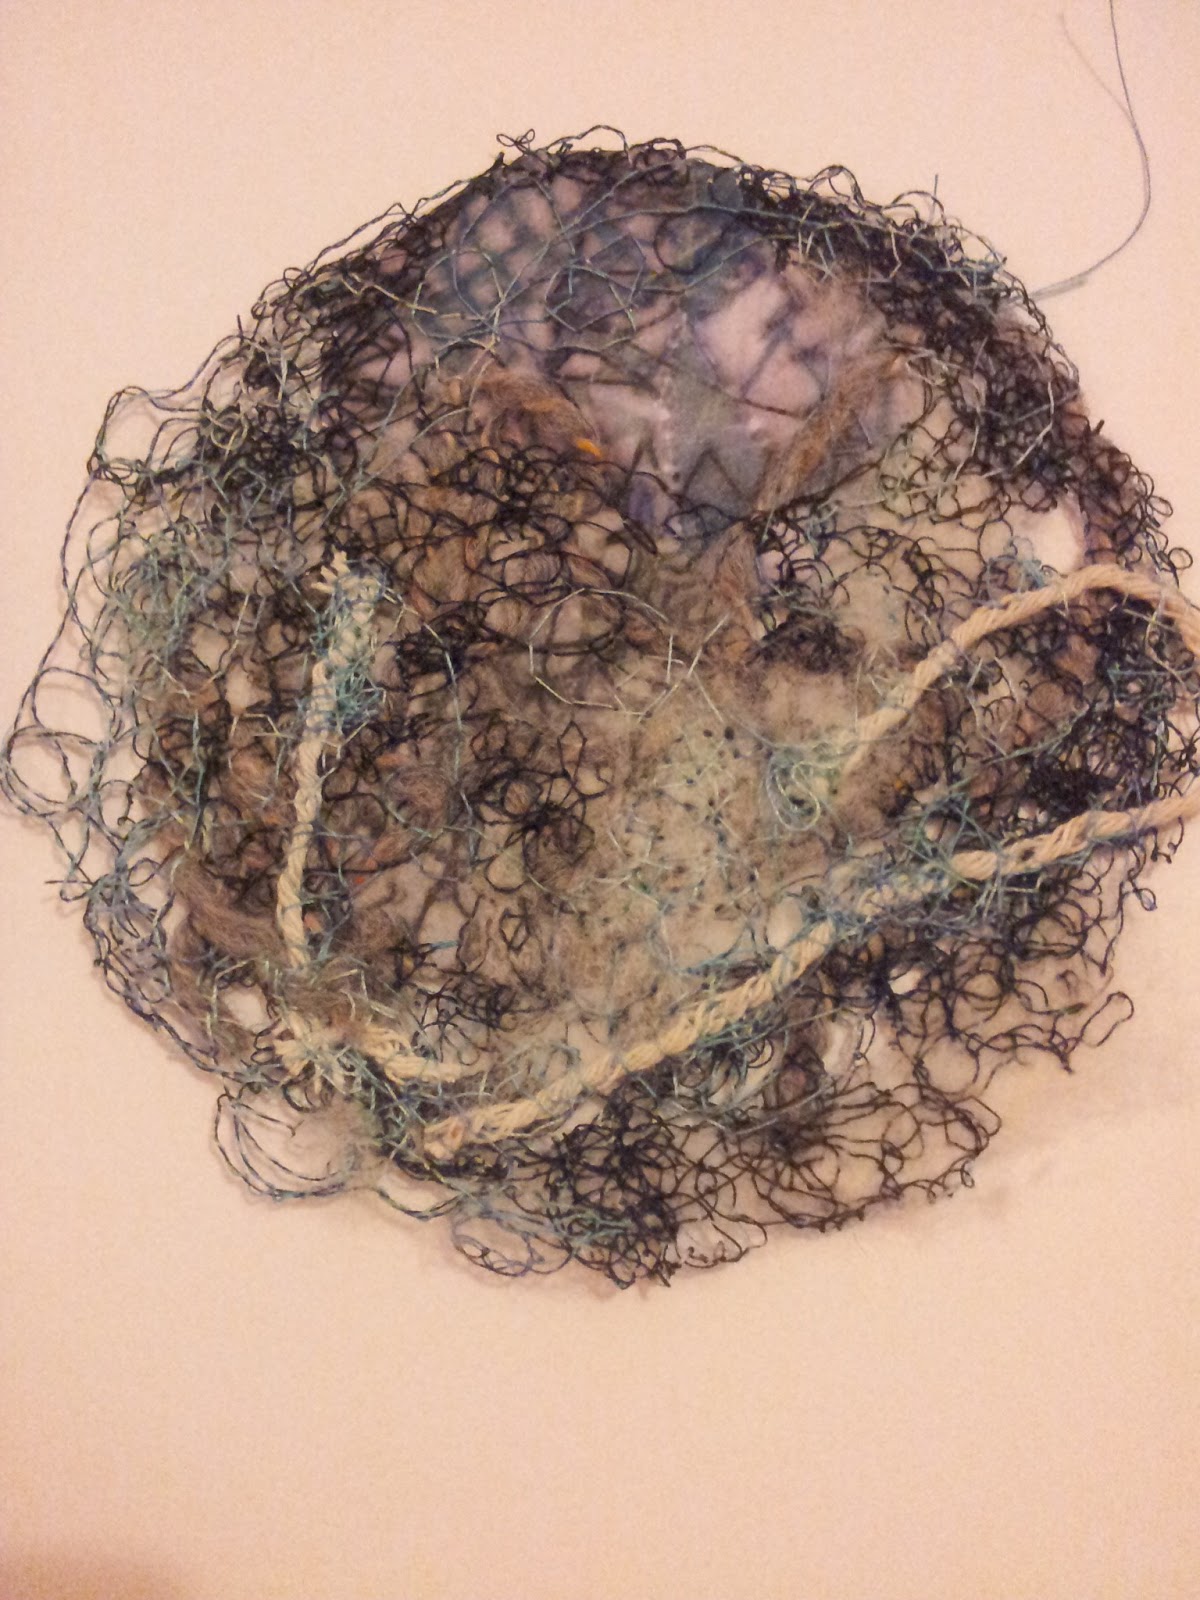 Create, Textile and Stitch: Textiles/Fashion project at the moment